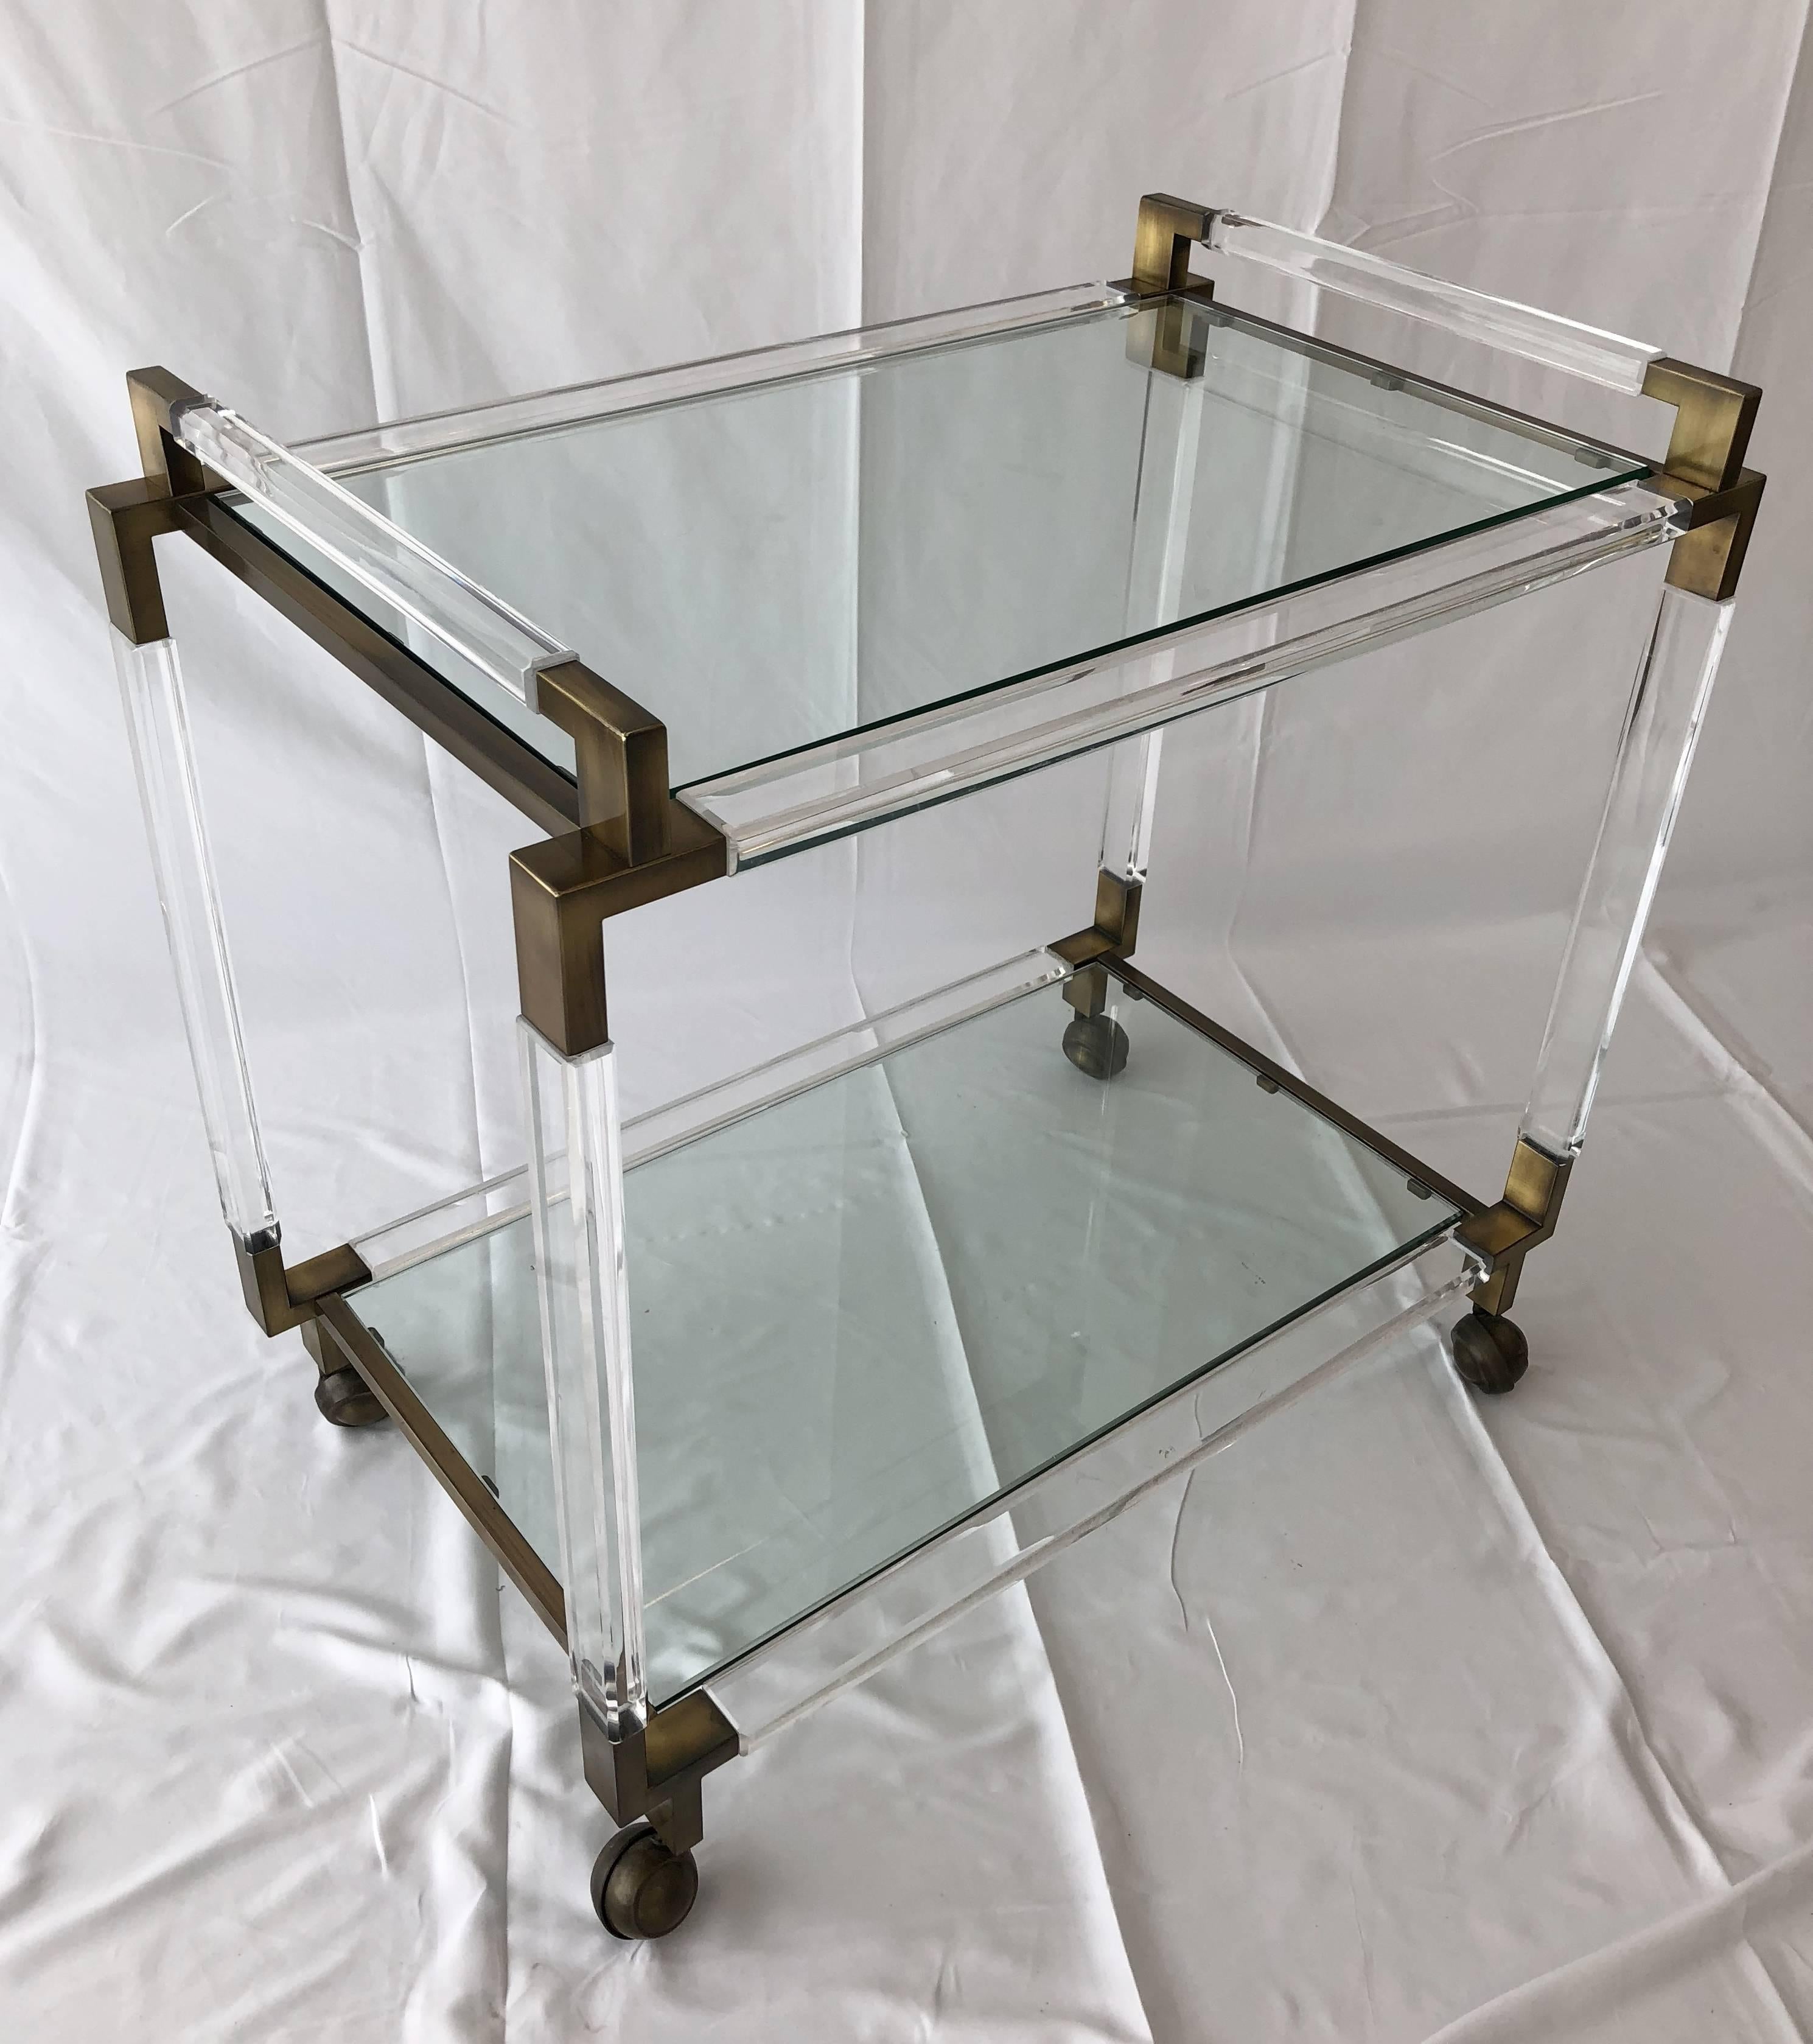 Stunning and beautiful Lucite and brass bar-cart designed and manufactured by Charles Hollis Jones as part of his 